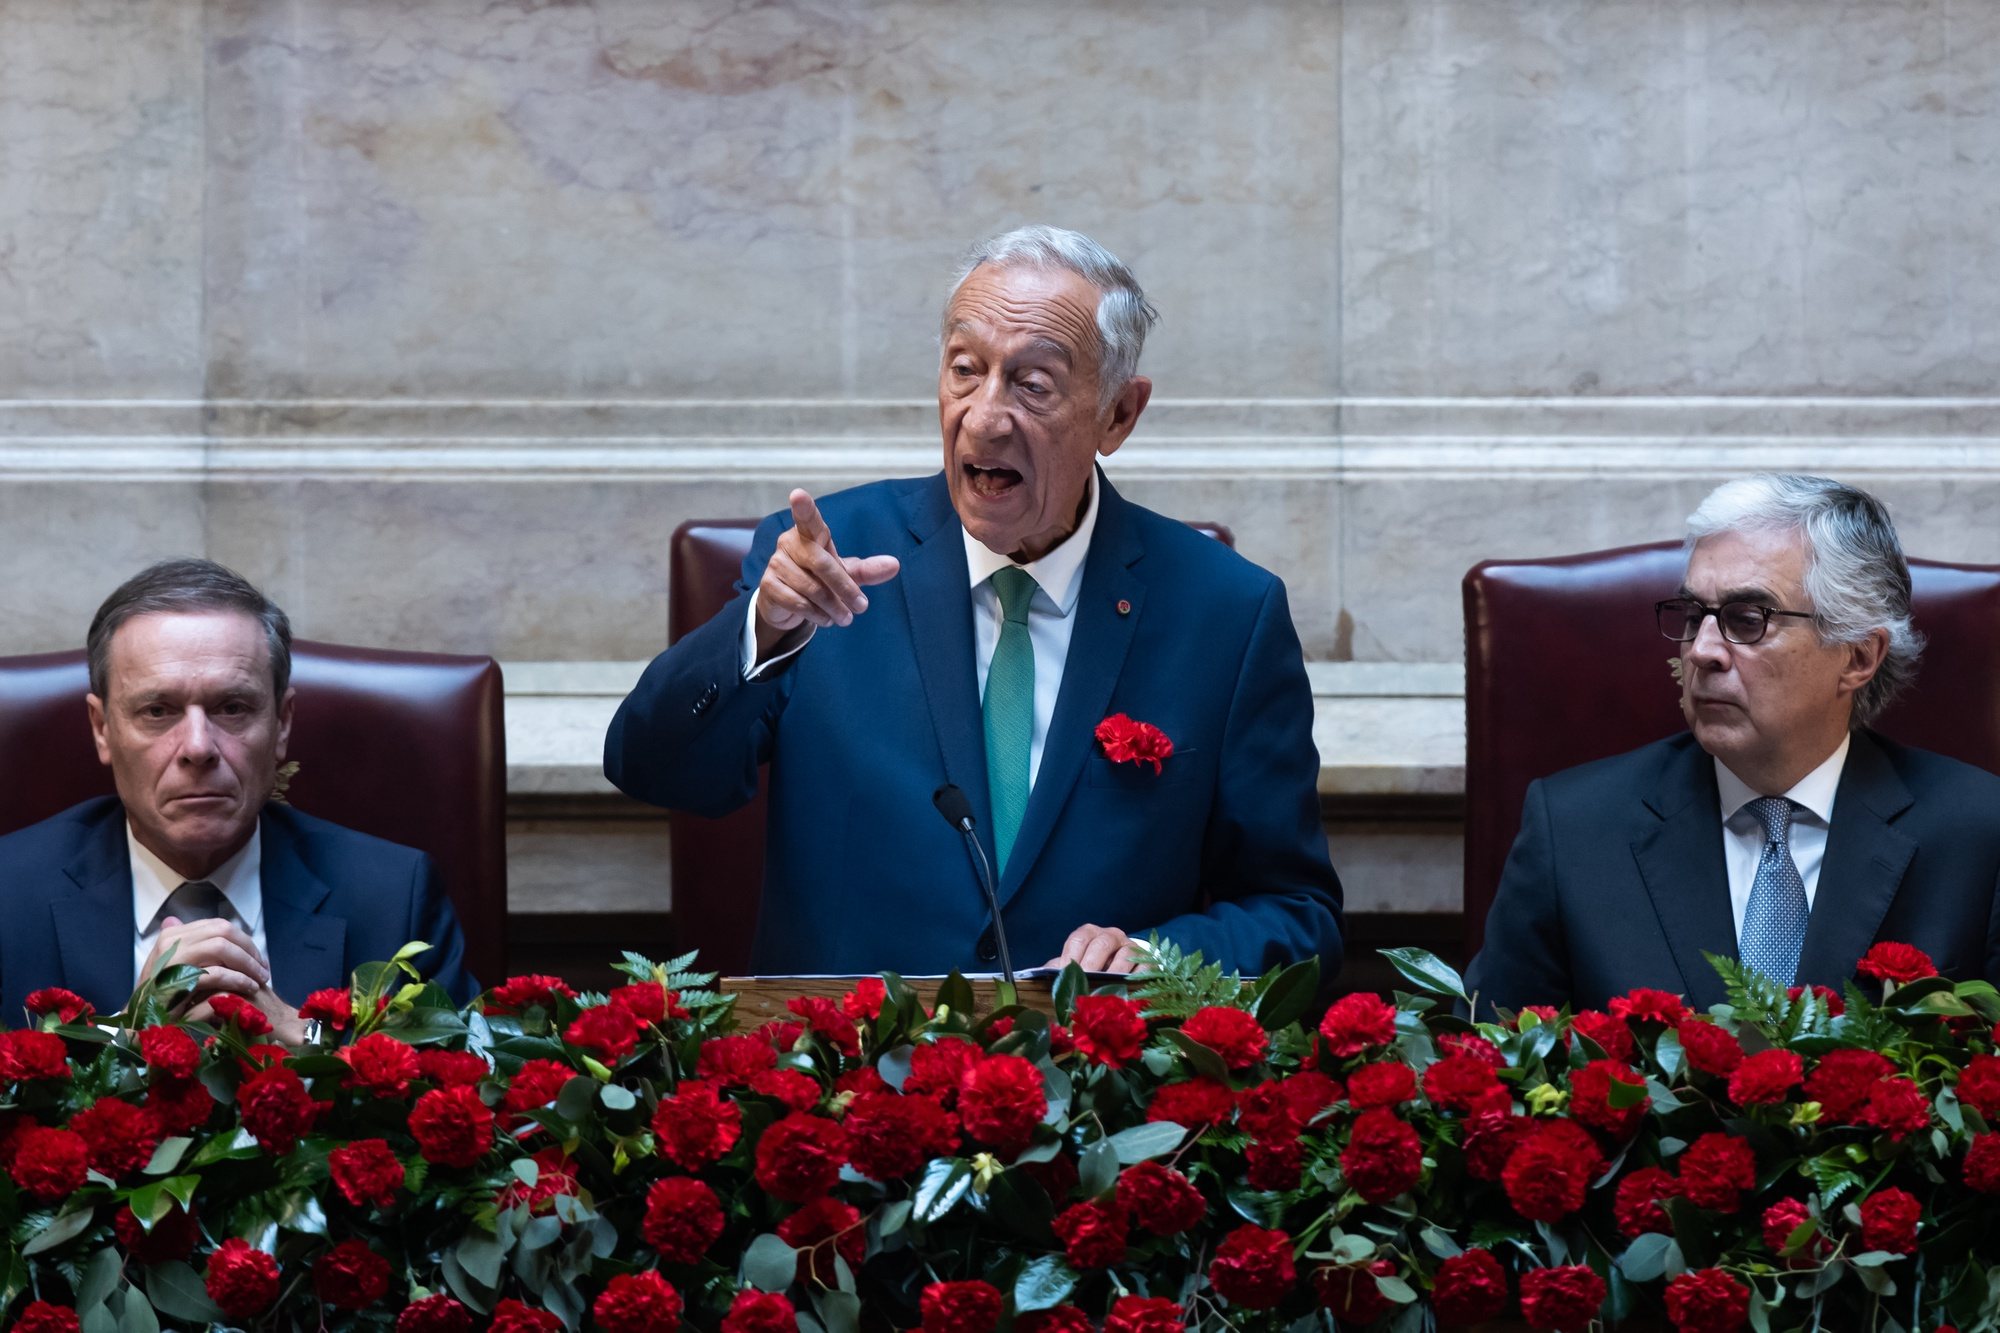 Portuguese President, Marcelo Rebelo de Sousa, delivers a speech during the solemn comemorative session at the Portuguese parliament in Lisbon, Portugal, 25 April 2024. Portugal celebrates the 50th anniversary of the Carnation Revolution that ended the authoritarian regime of Estado Novo (New State) that ruled the country between 1926 to 1974. JOSE SENA GOULAO/LUSA